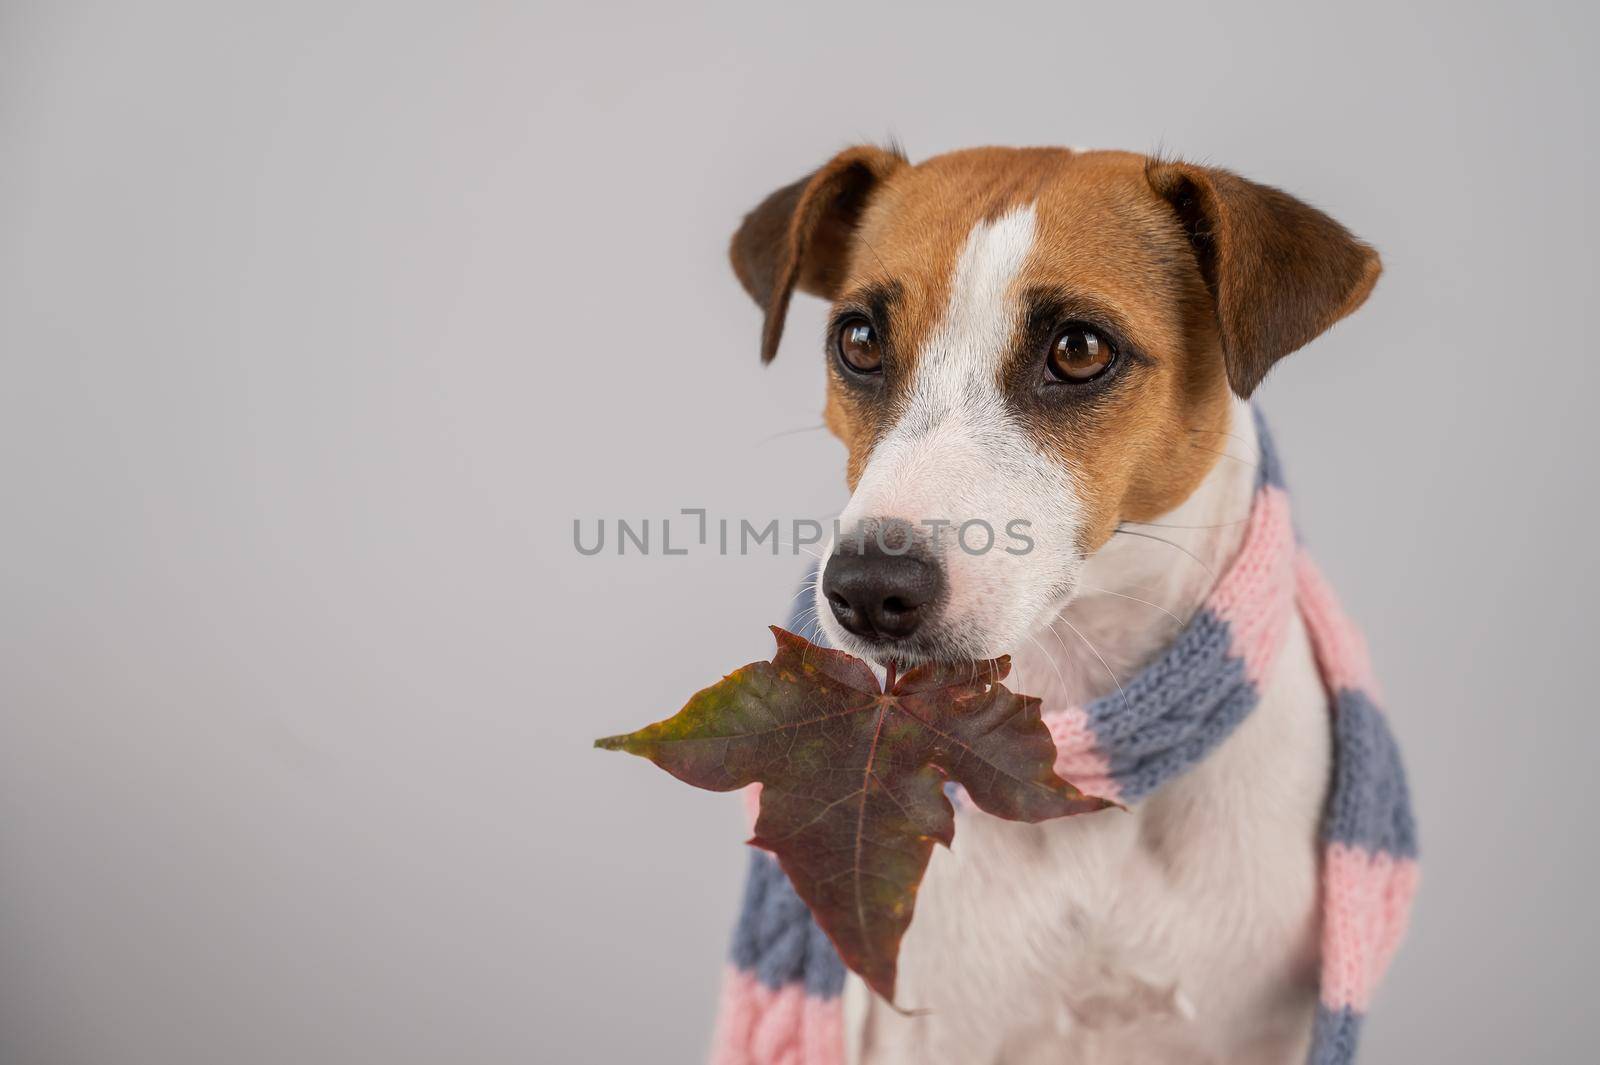 Dog Jack Russell Terrier wearing a knit scarf holding a maple leaf on a white background. by mrwed54